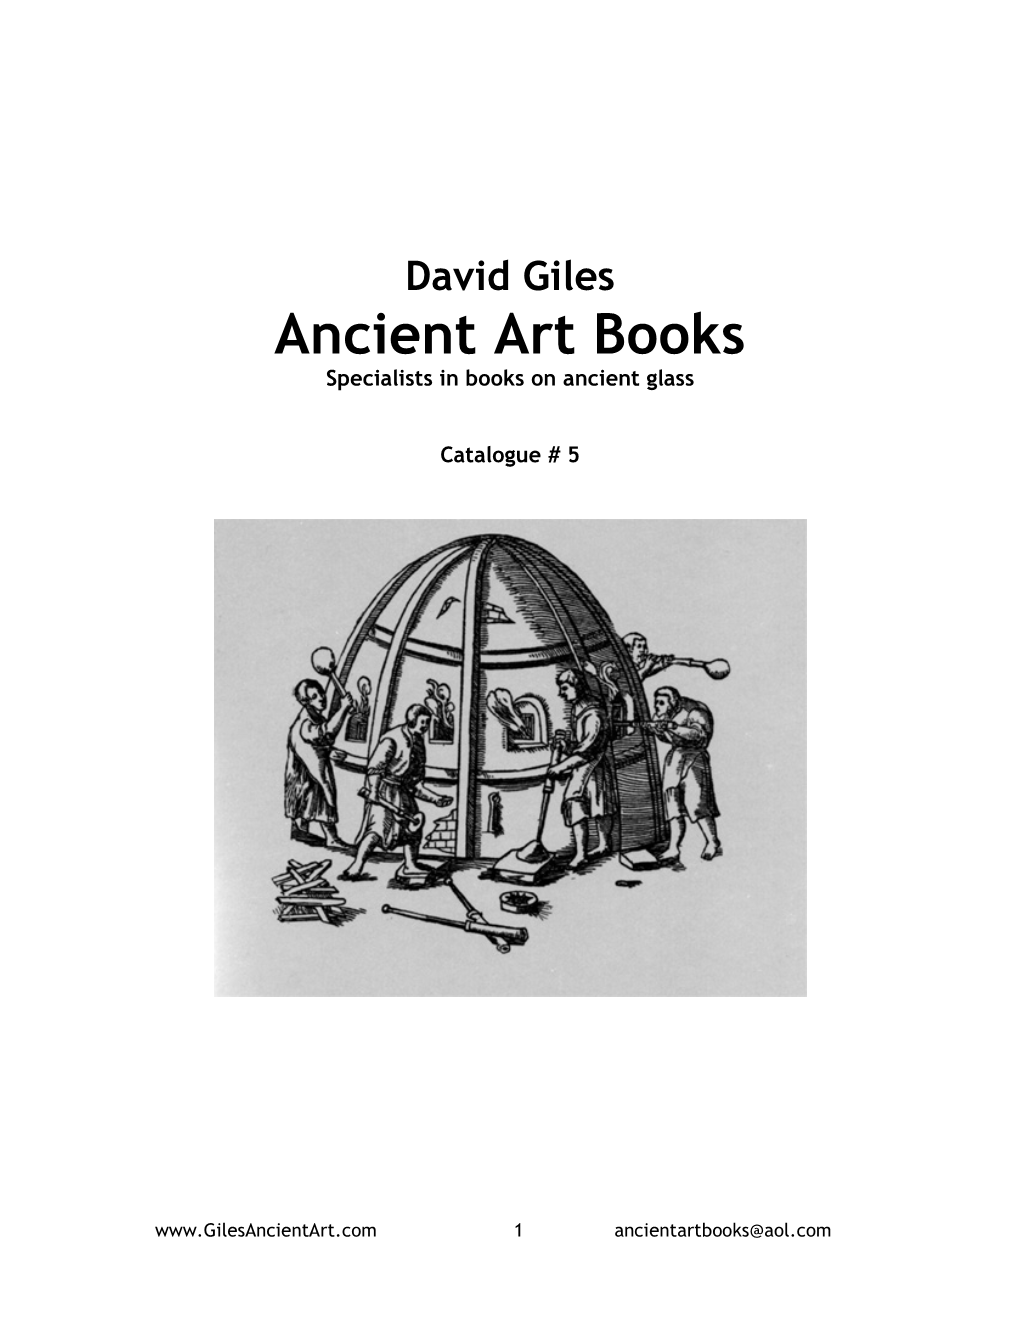 Ancient Art Books Specialists in Books on Ancient Glass